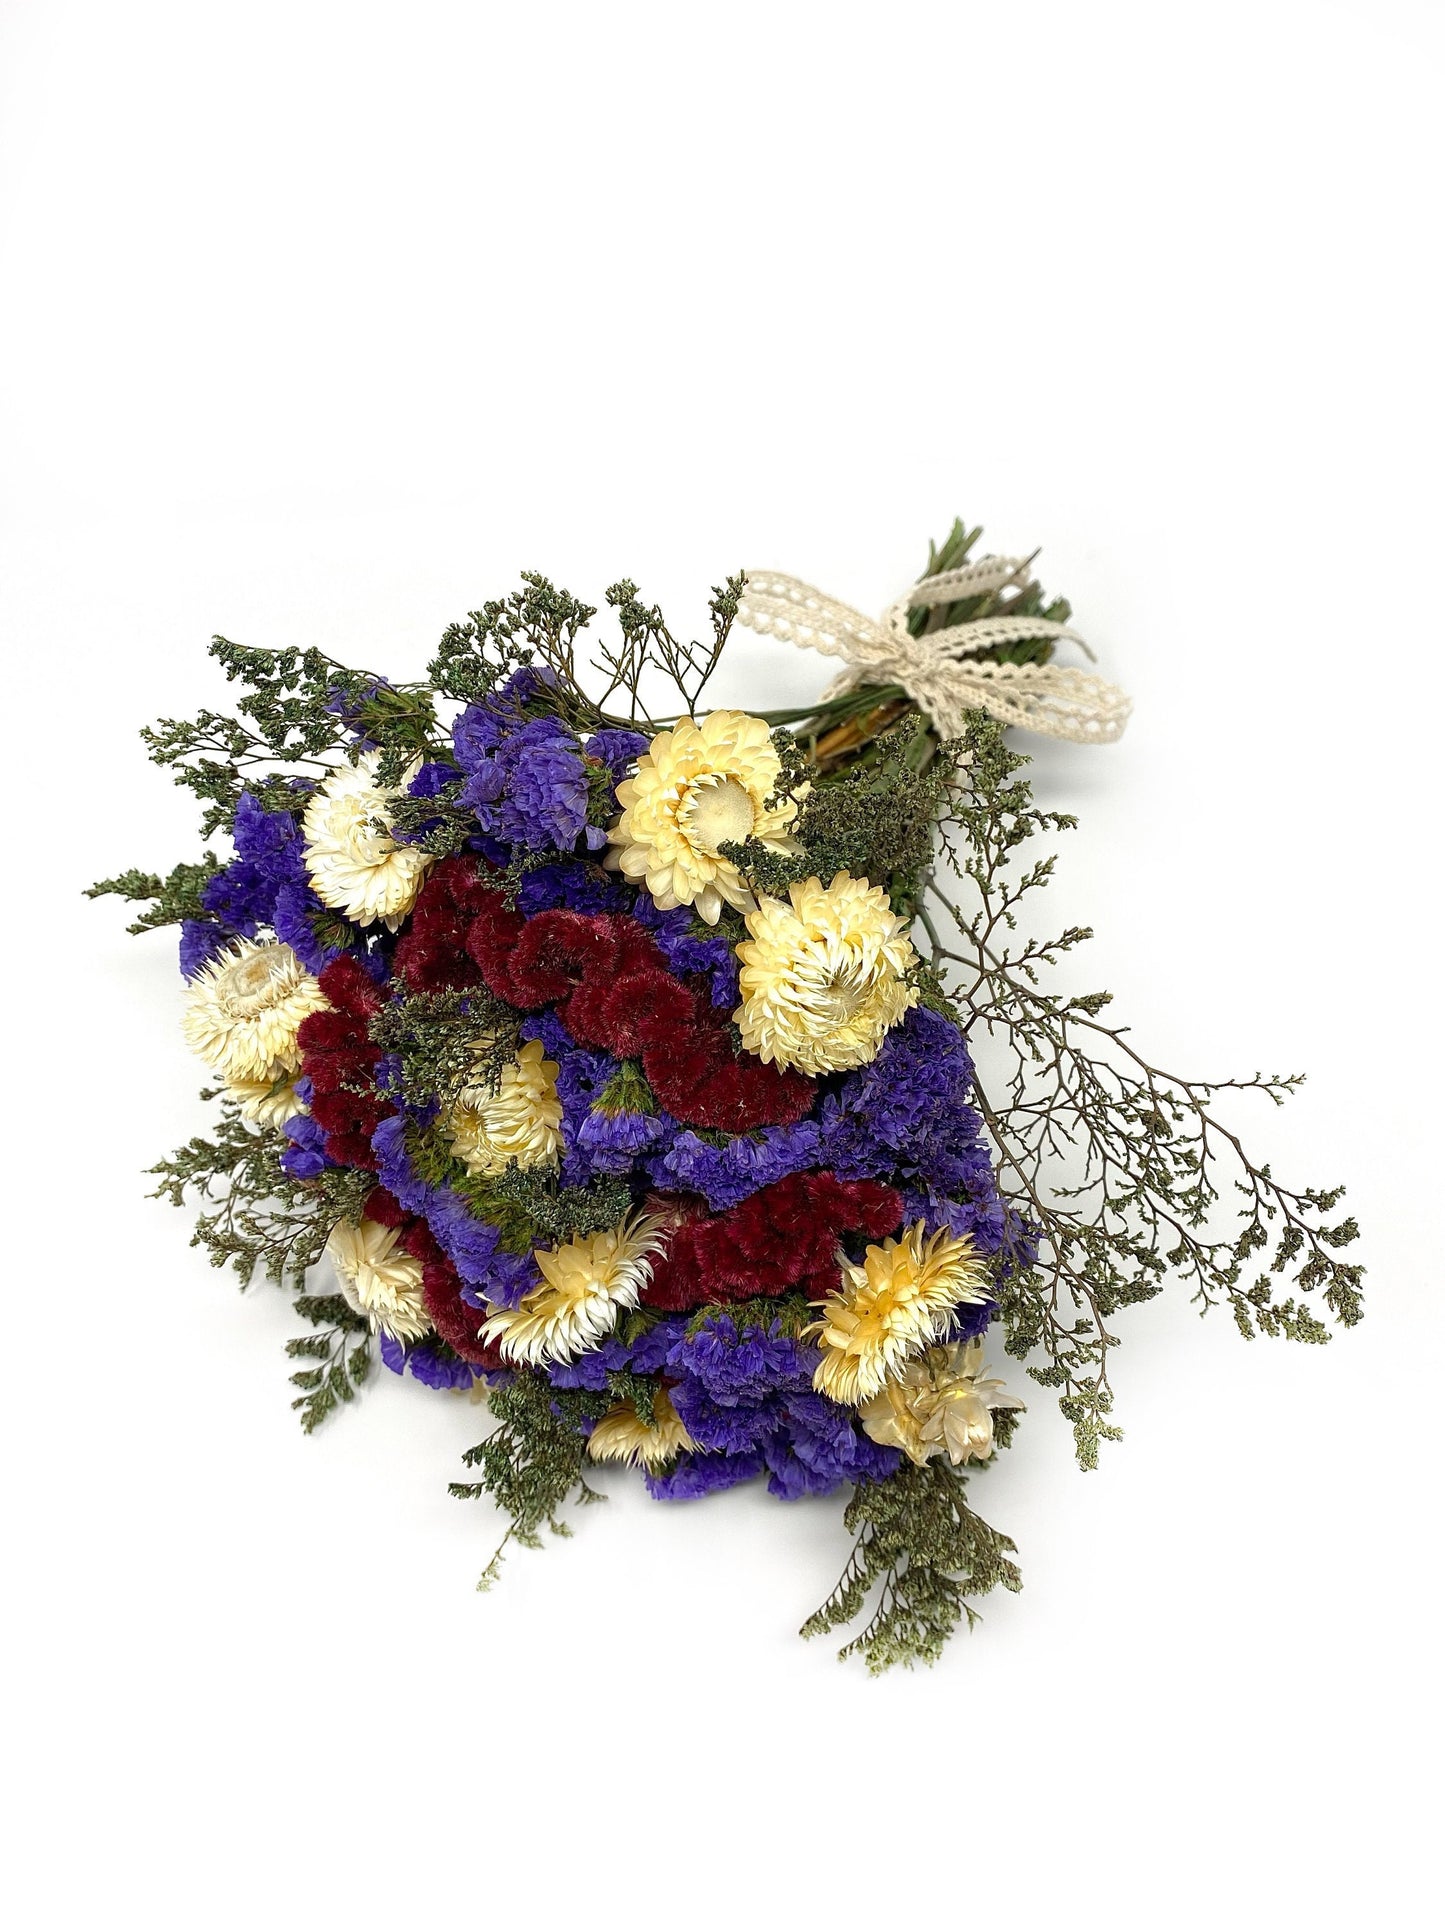 Dried Bouquet, Wedding Bouquet, Preserved Floral, Decoration, Bridal, House Decor, White and Green, Purple, Red, Strawflowers